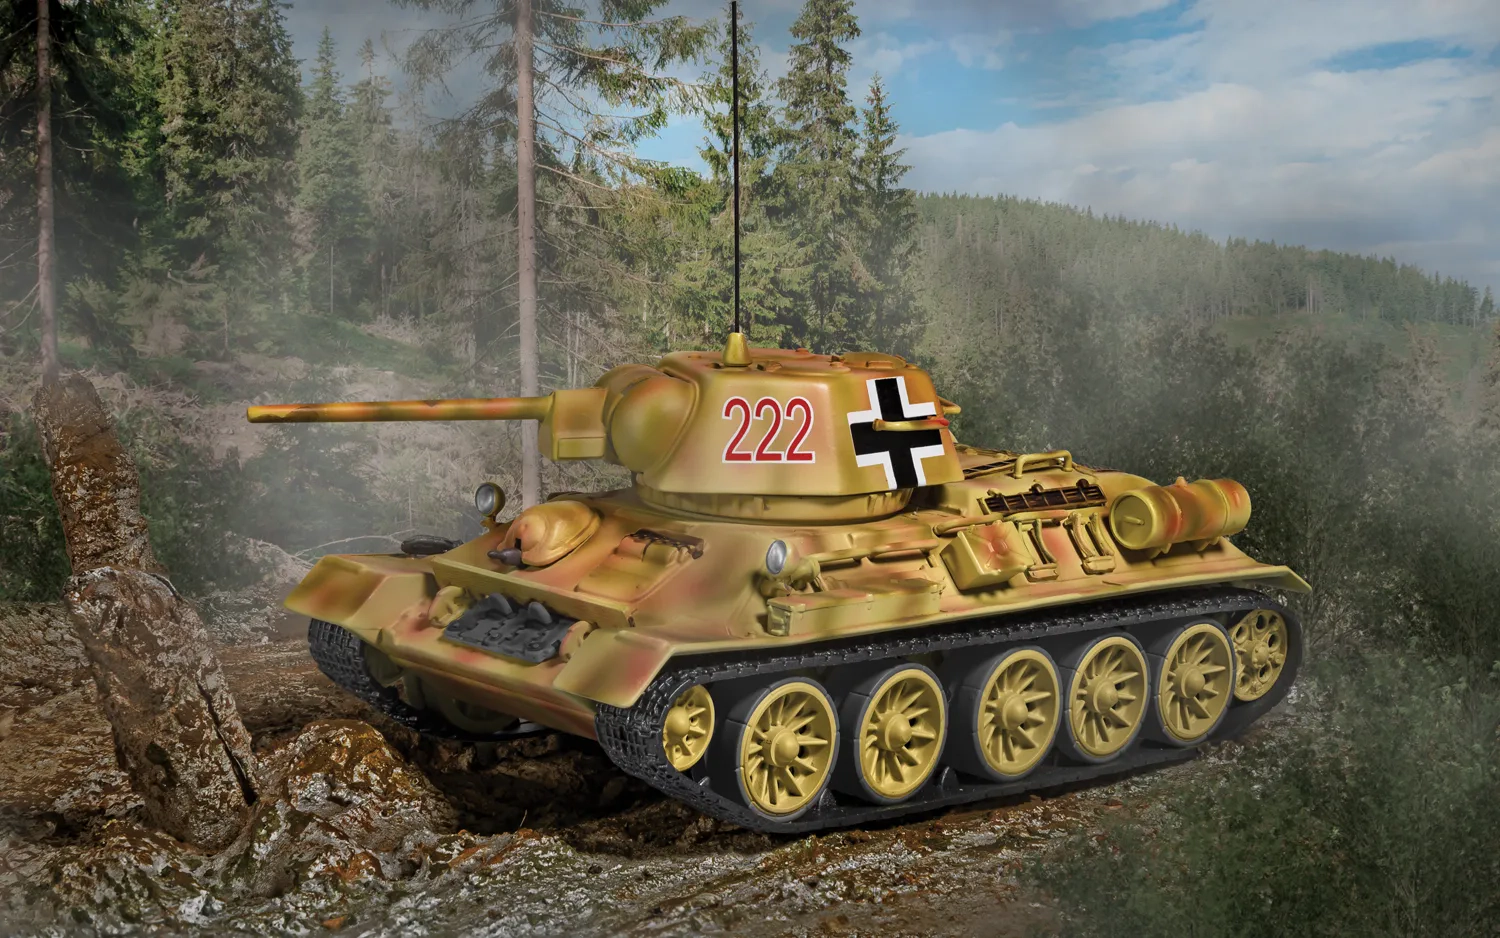 Beute Panzer (Trophy Tank) - 23rd Panzer Division